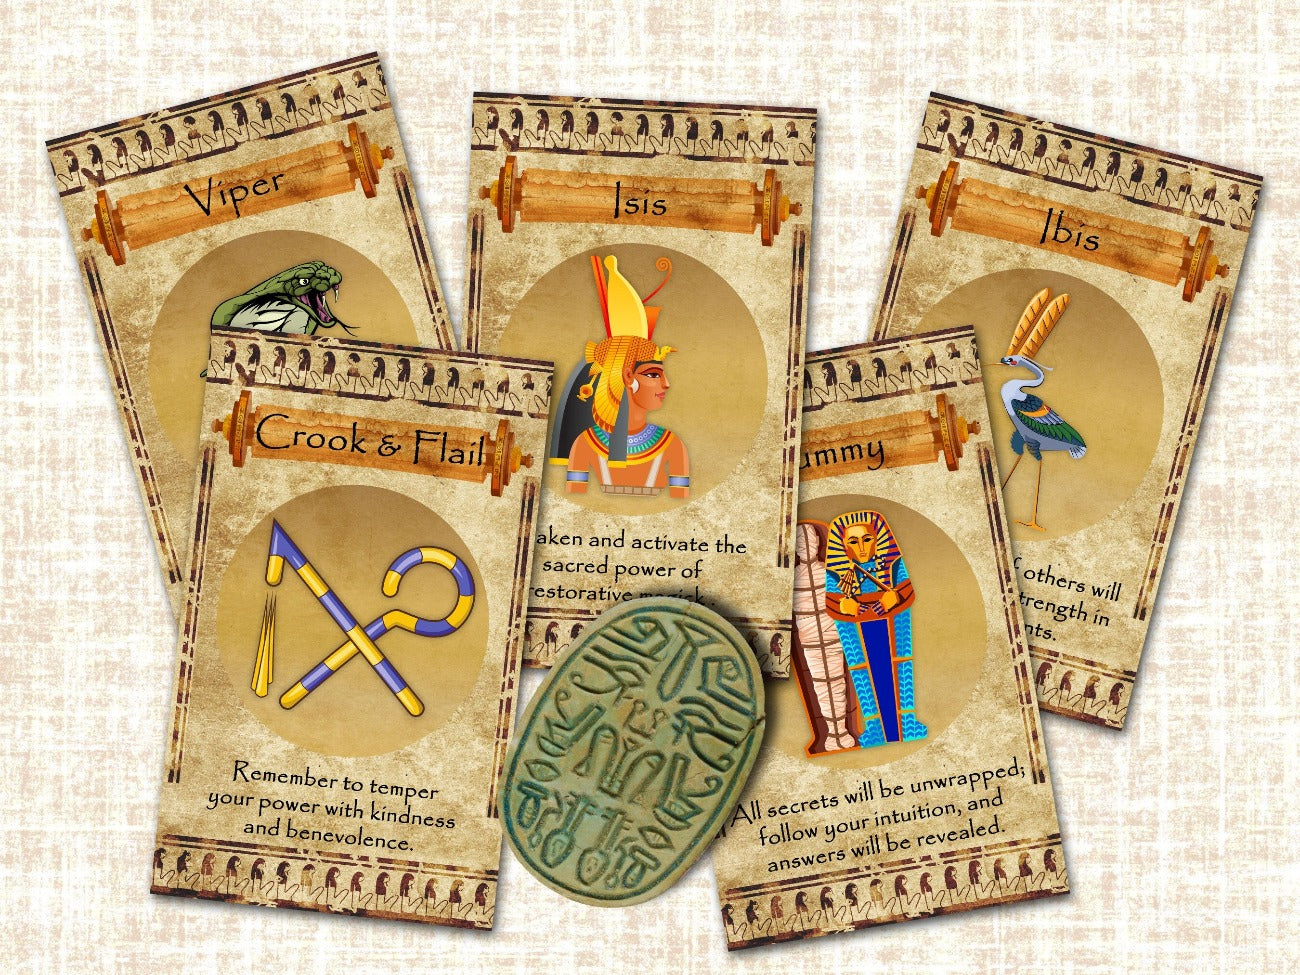 Egyptian Oracle Cards, Viper, Isis, Ibis, Crook and Flail, and Mummy.